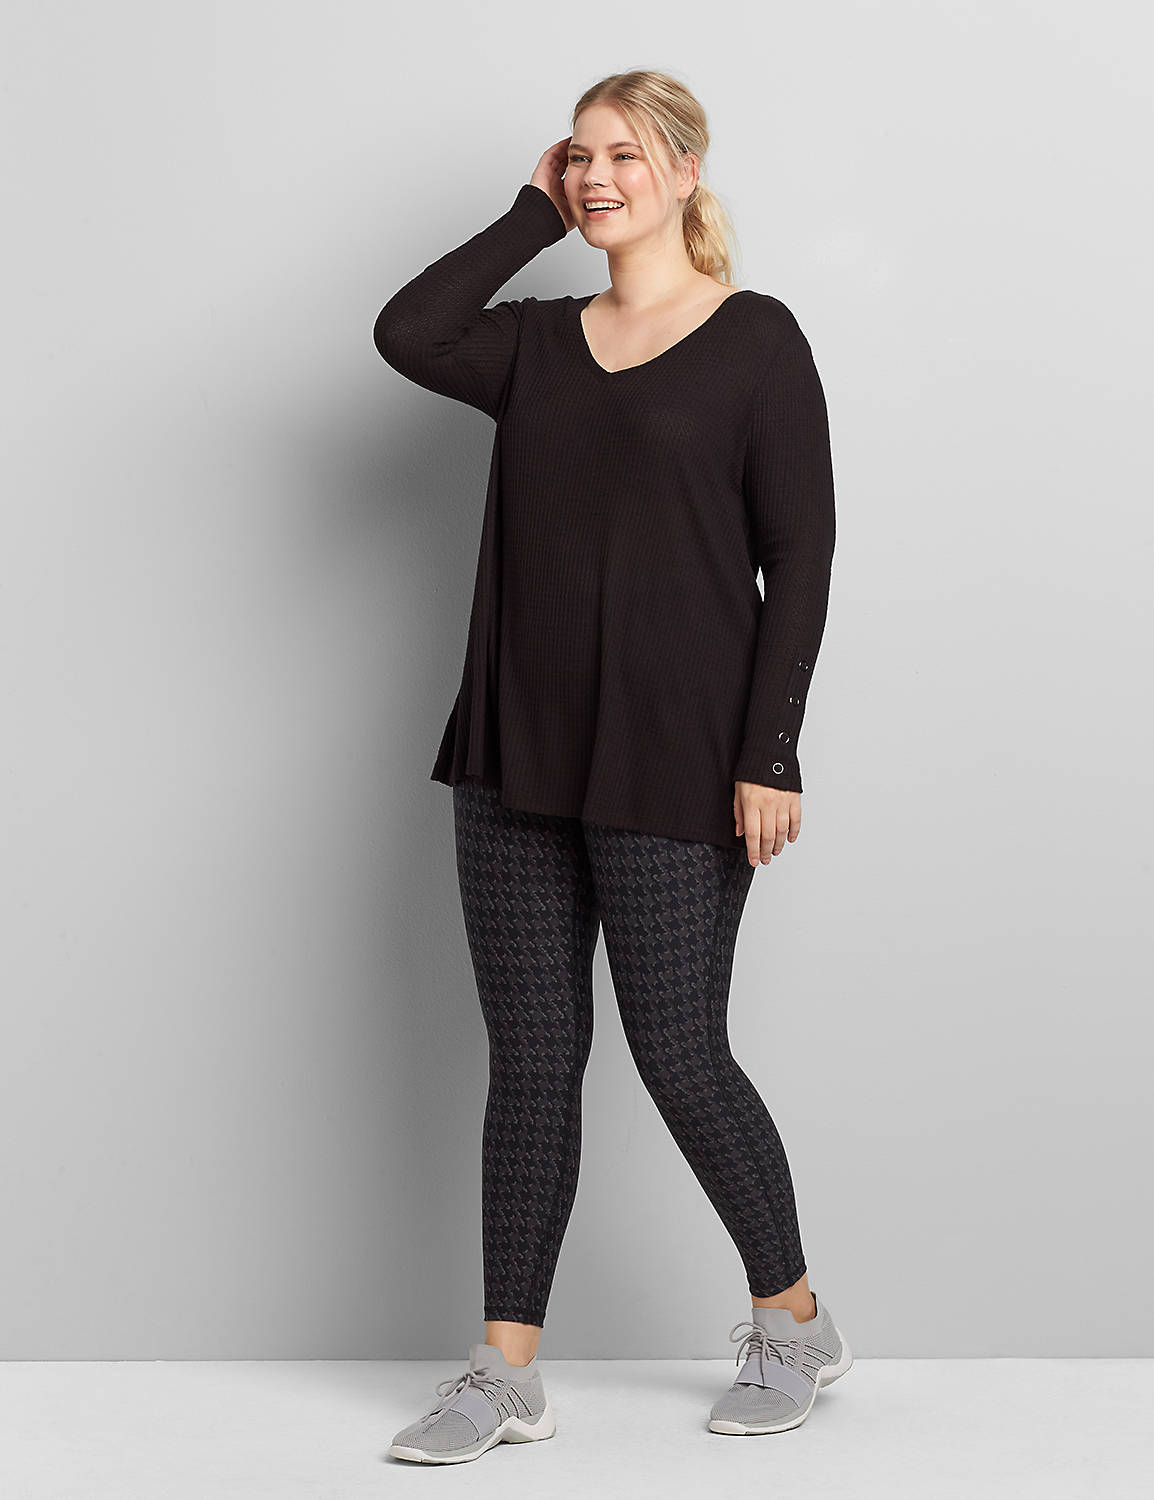 LIVI 7/8 Power Legging With Wicking Product Image 3